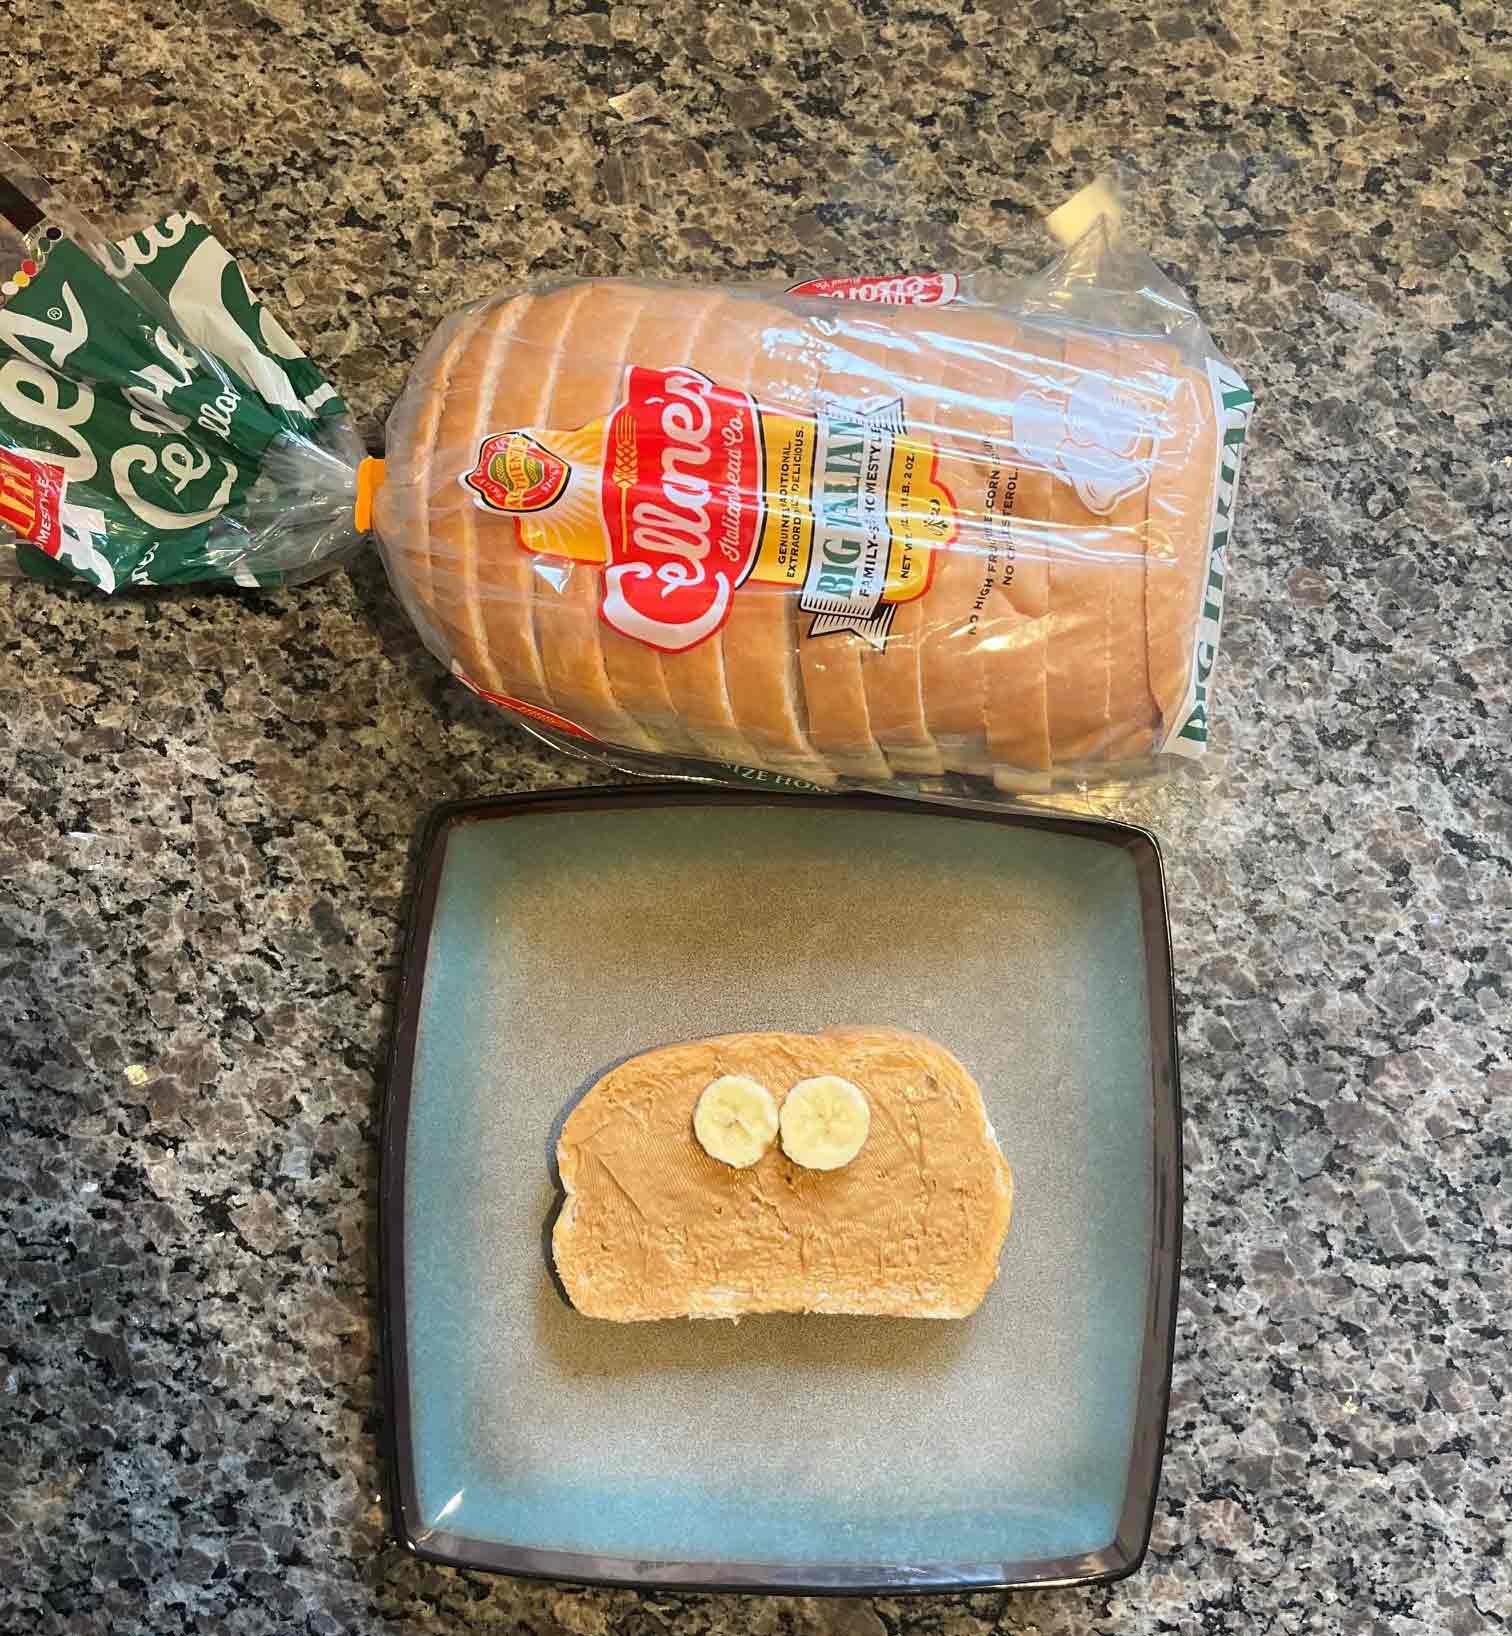 Bread with two banana wheels on it